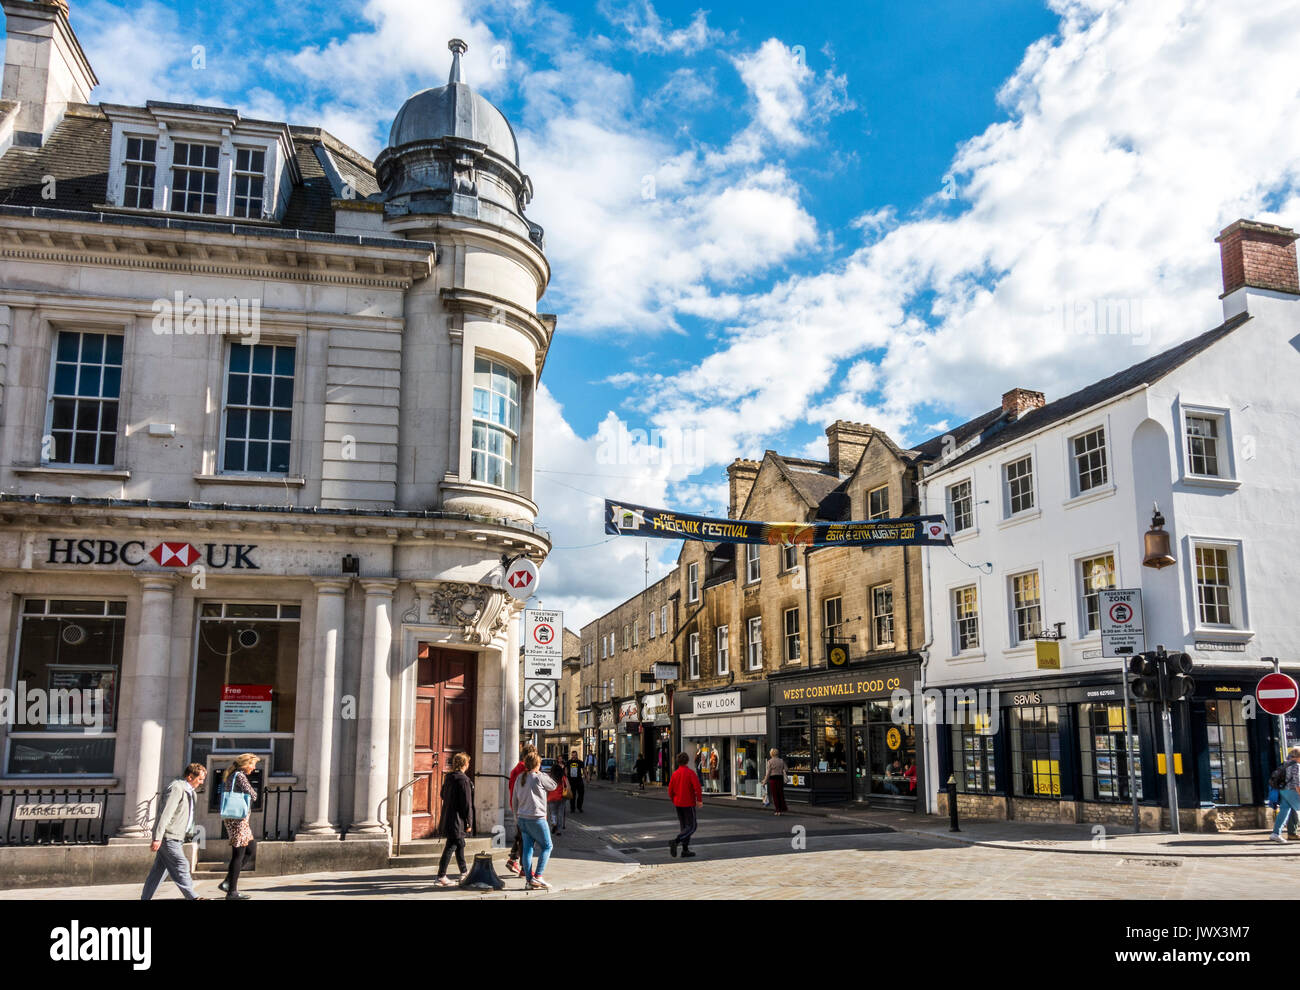 HSBC bank and other shops in the centre of the Cotswolds town of Cirencester, Gloucestershire, England, UK. Stock Photo